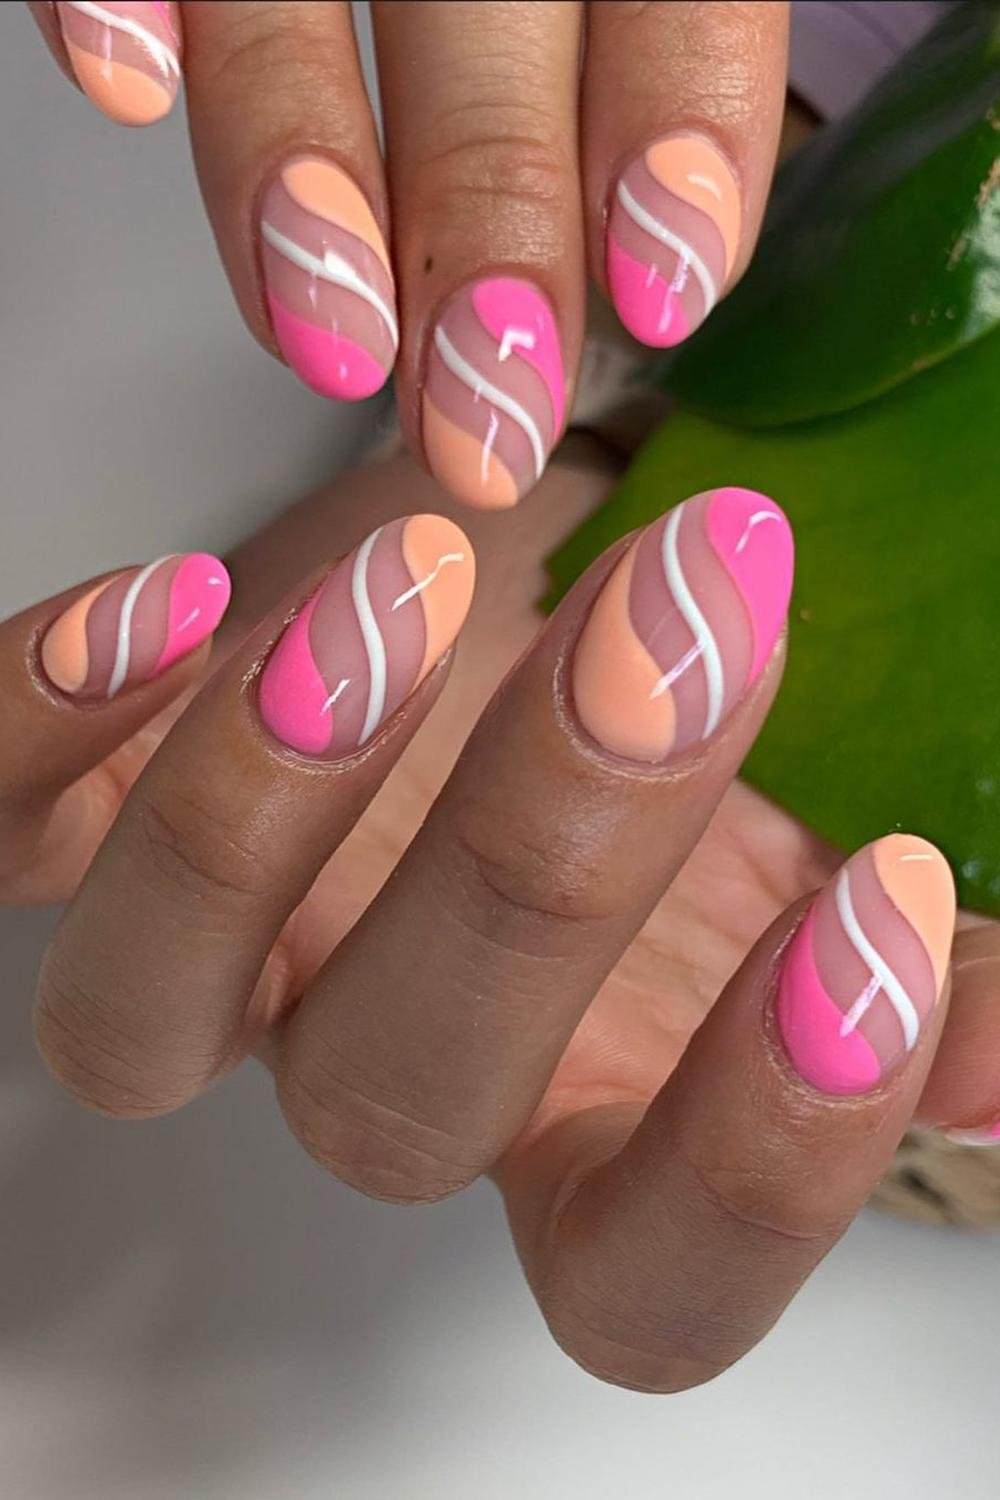 20 - Picture of Pink and Orange Nails